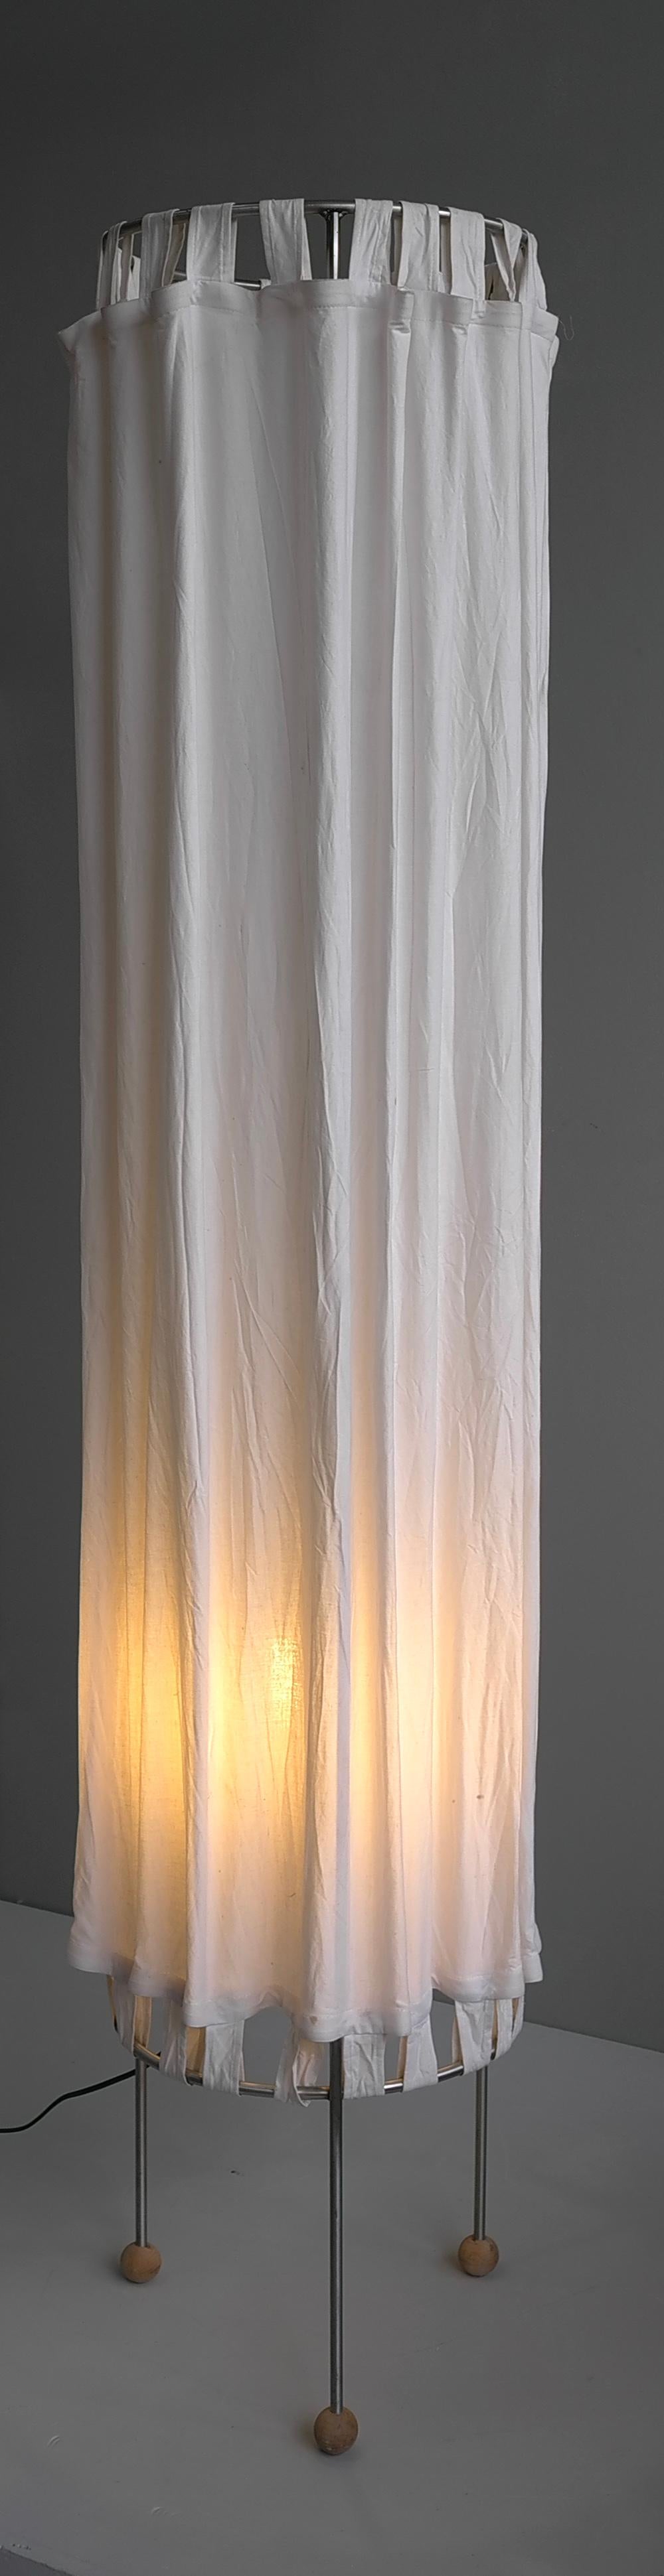 Extra Large White Linen Curtain Floorlamp, The Netherlands 1980's For Sale 6